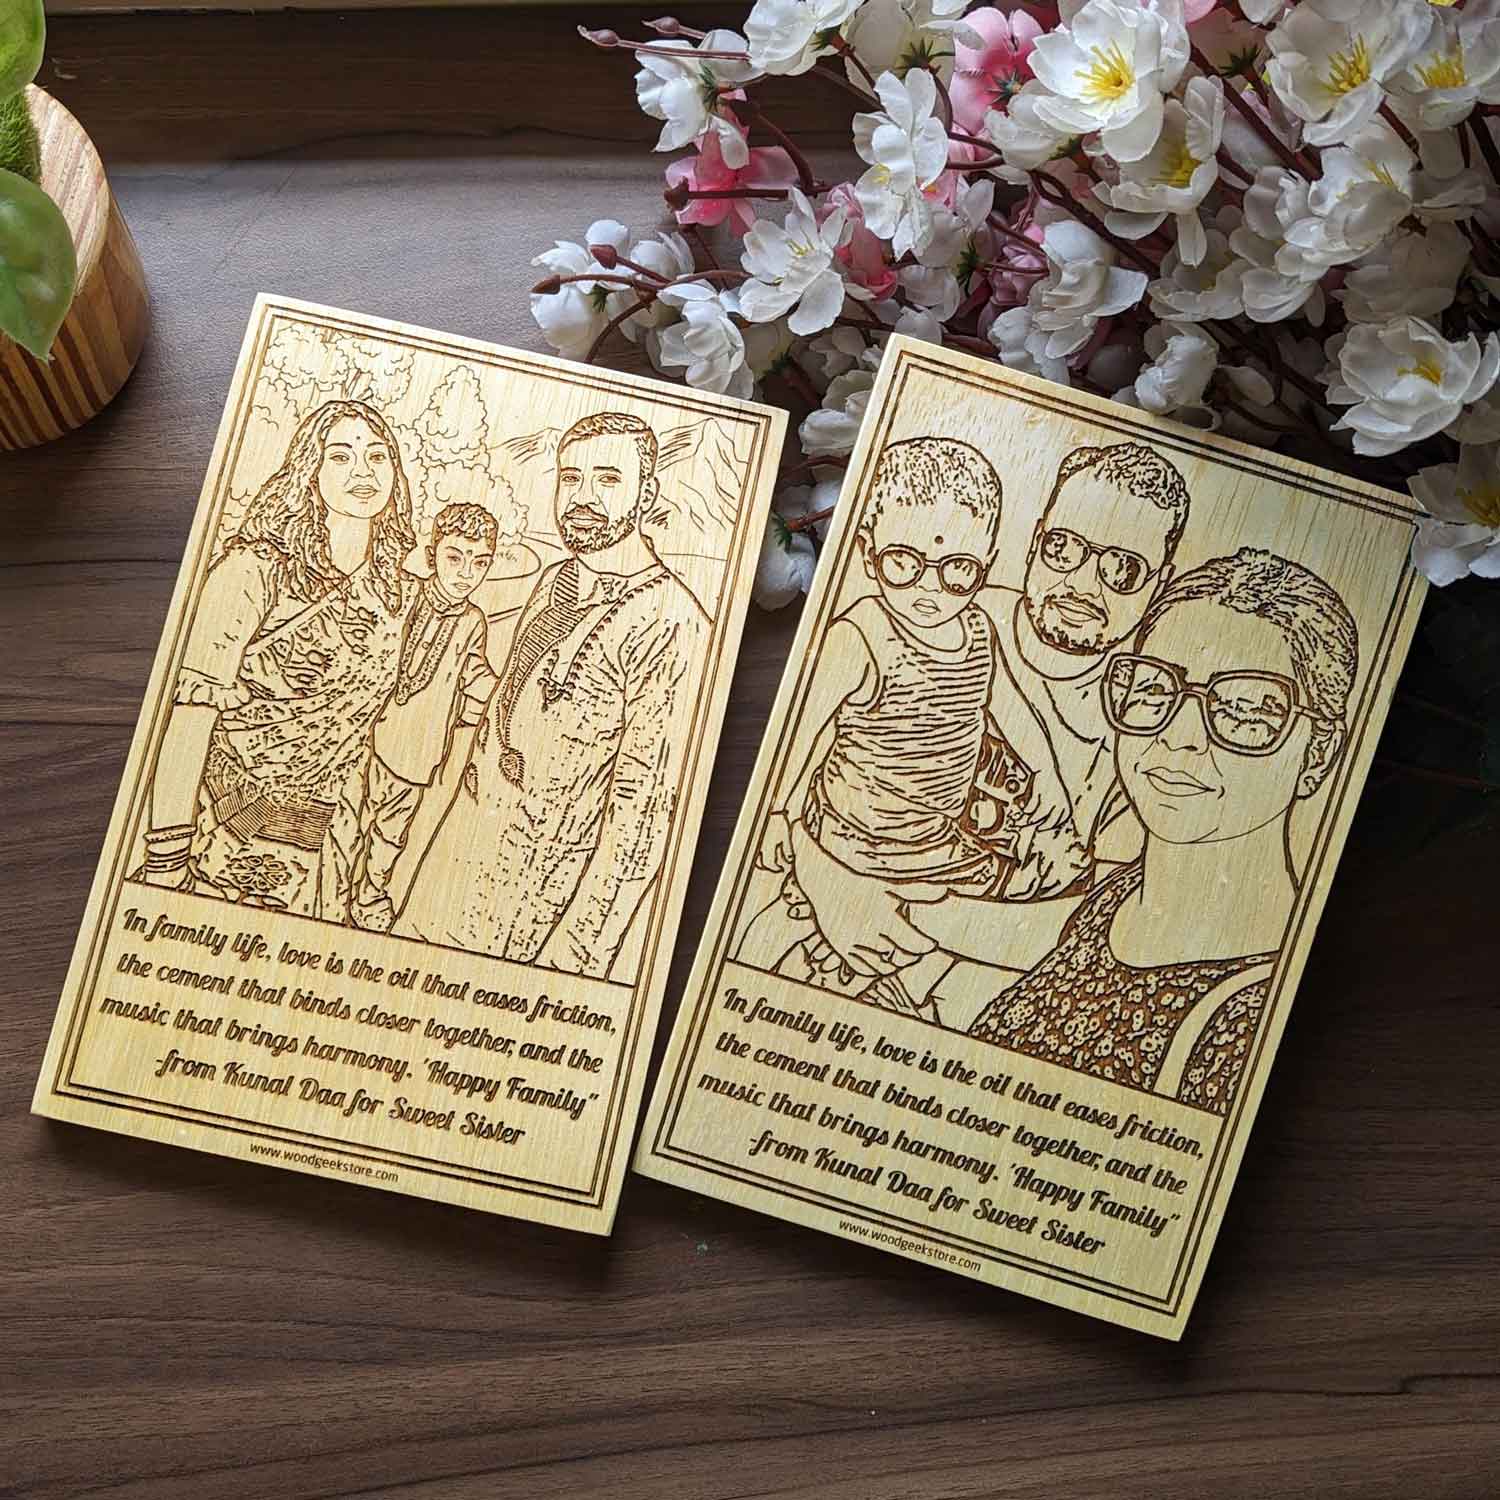 Harmony of Home - Personalized Wooden Family Portrait